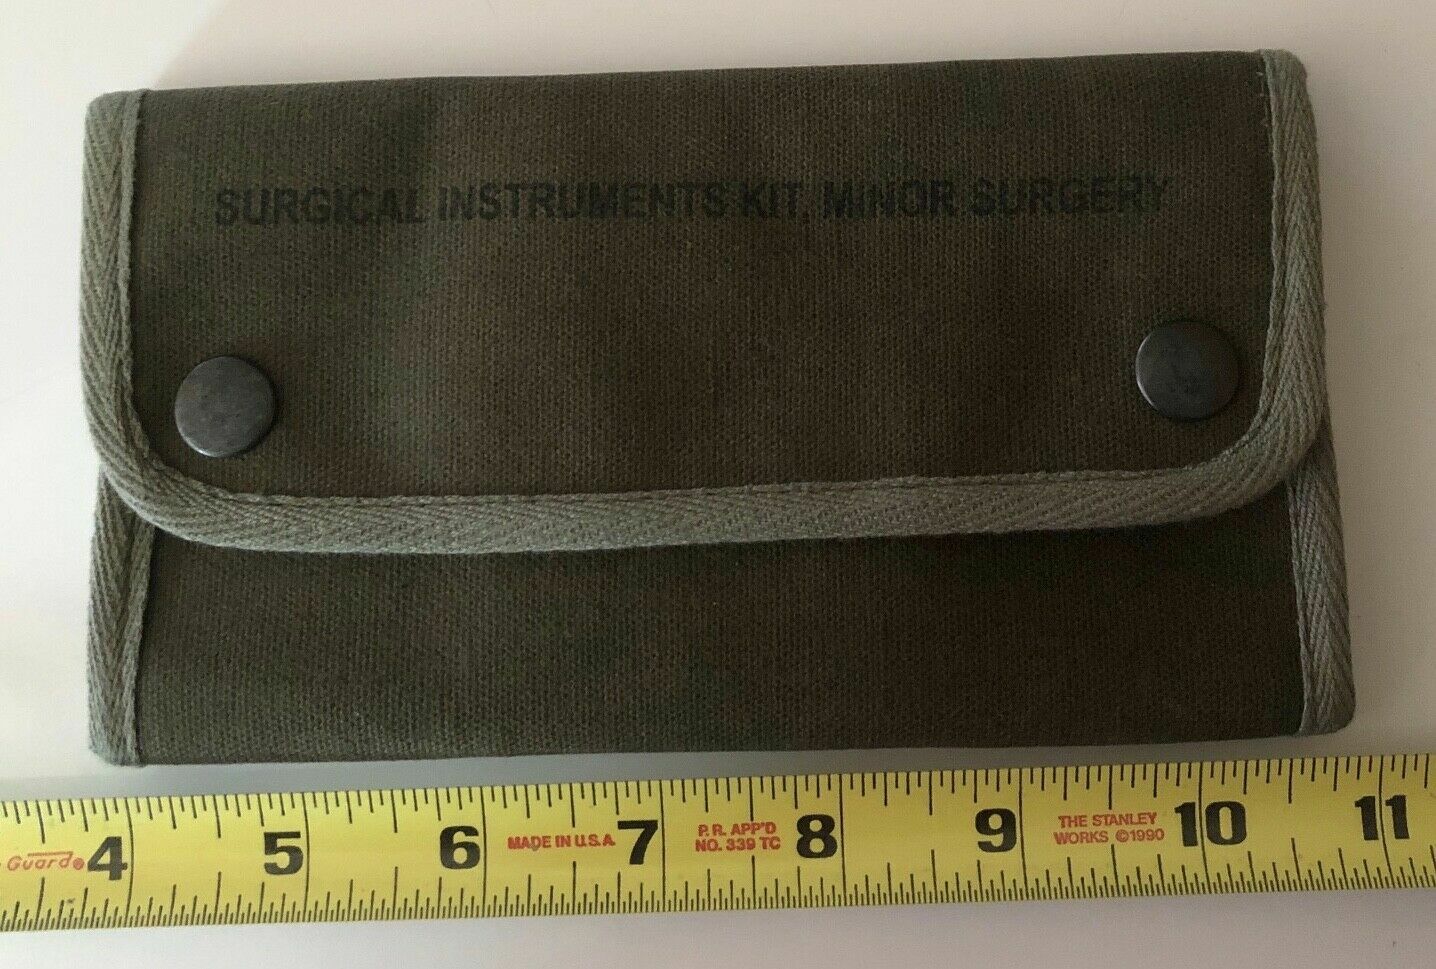 US military Field Surgical Kit minor surgery medical instrument pouch 